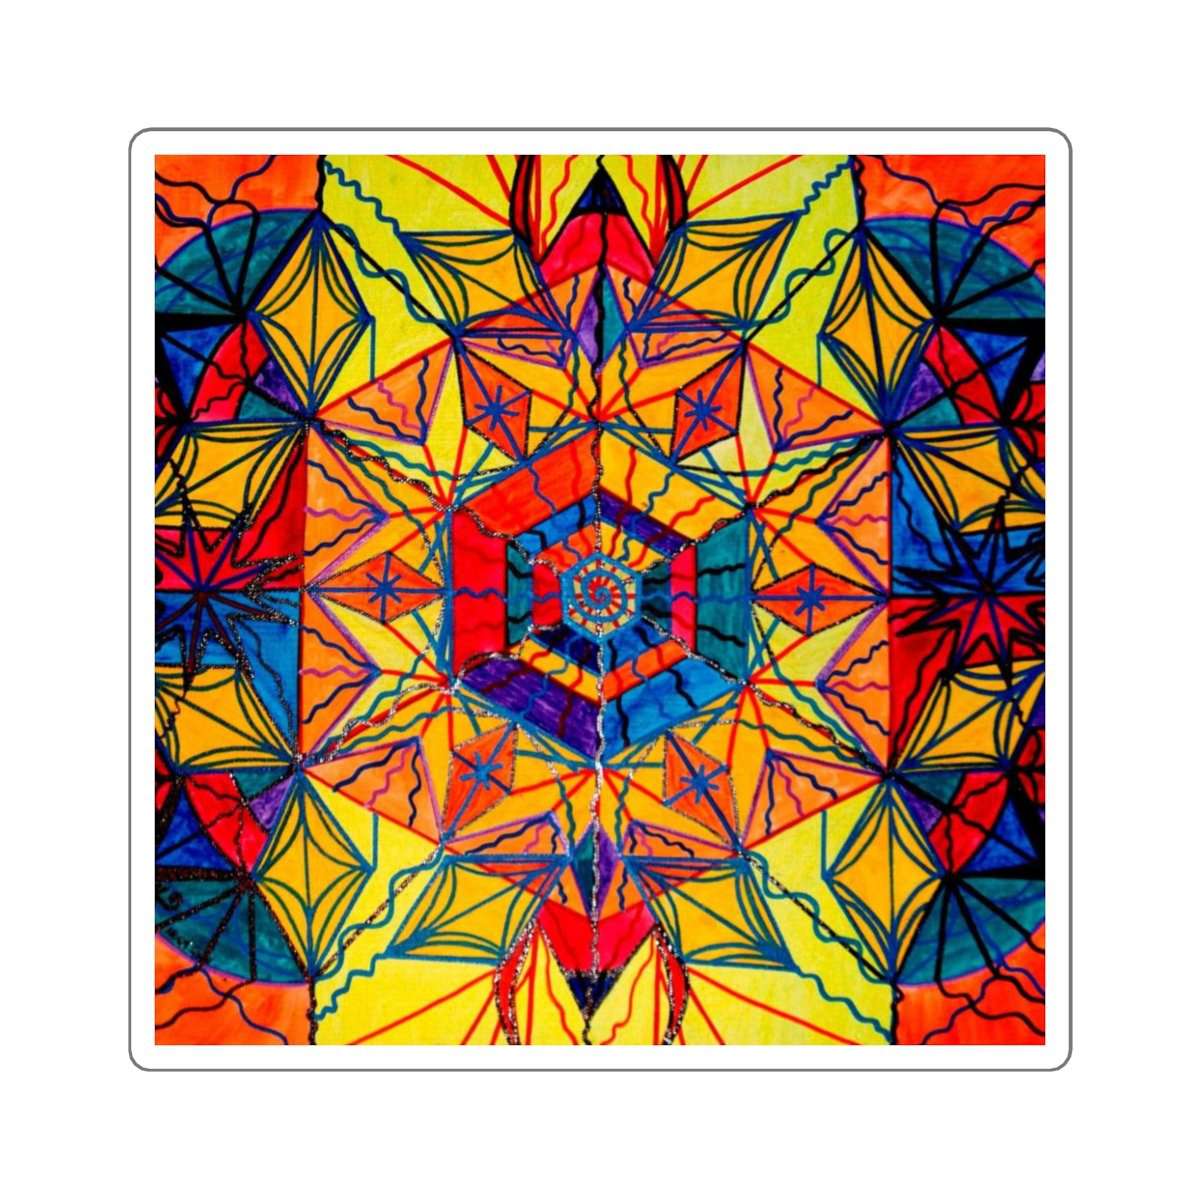 buy-cheap-wholesale-excitement-square-stickers-online-now_6.jpg